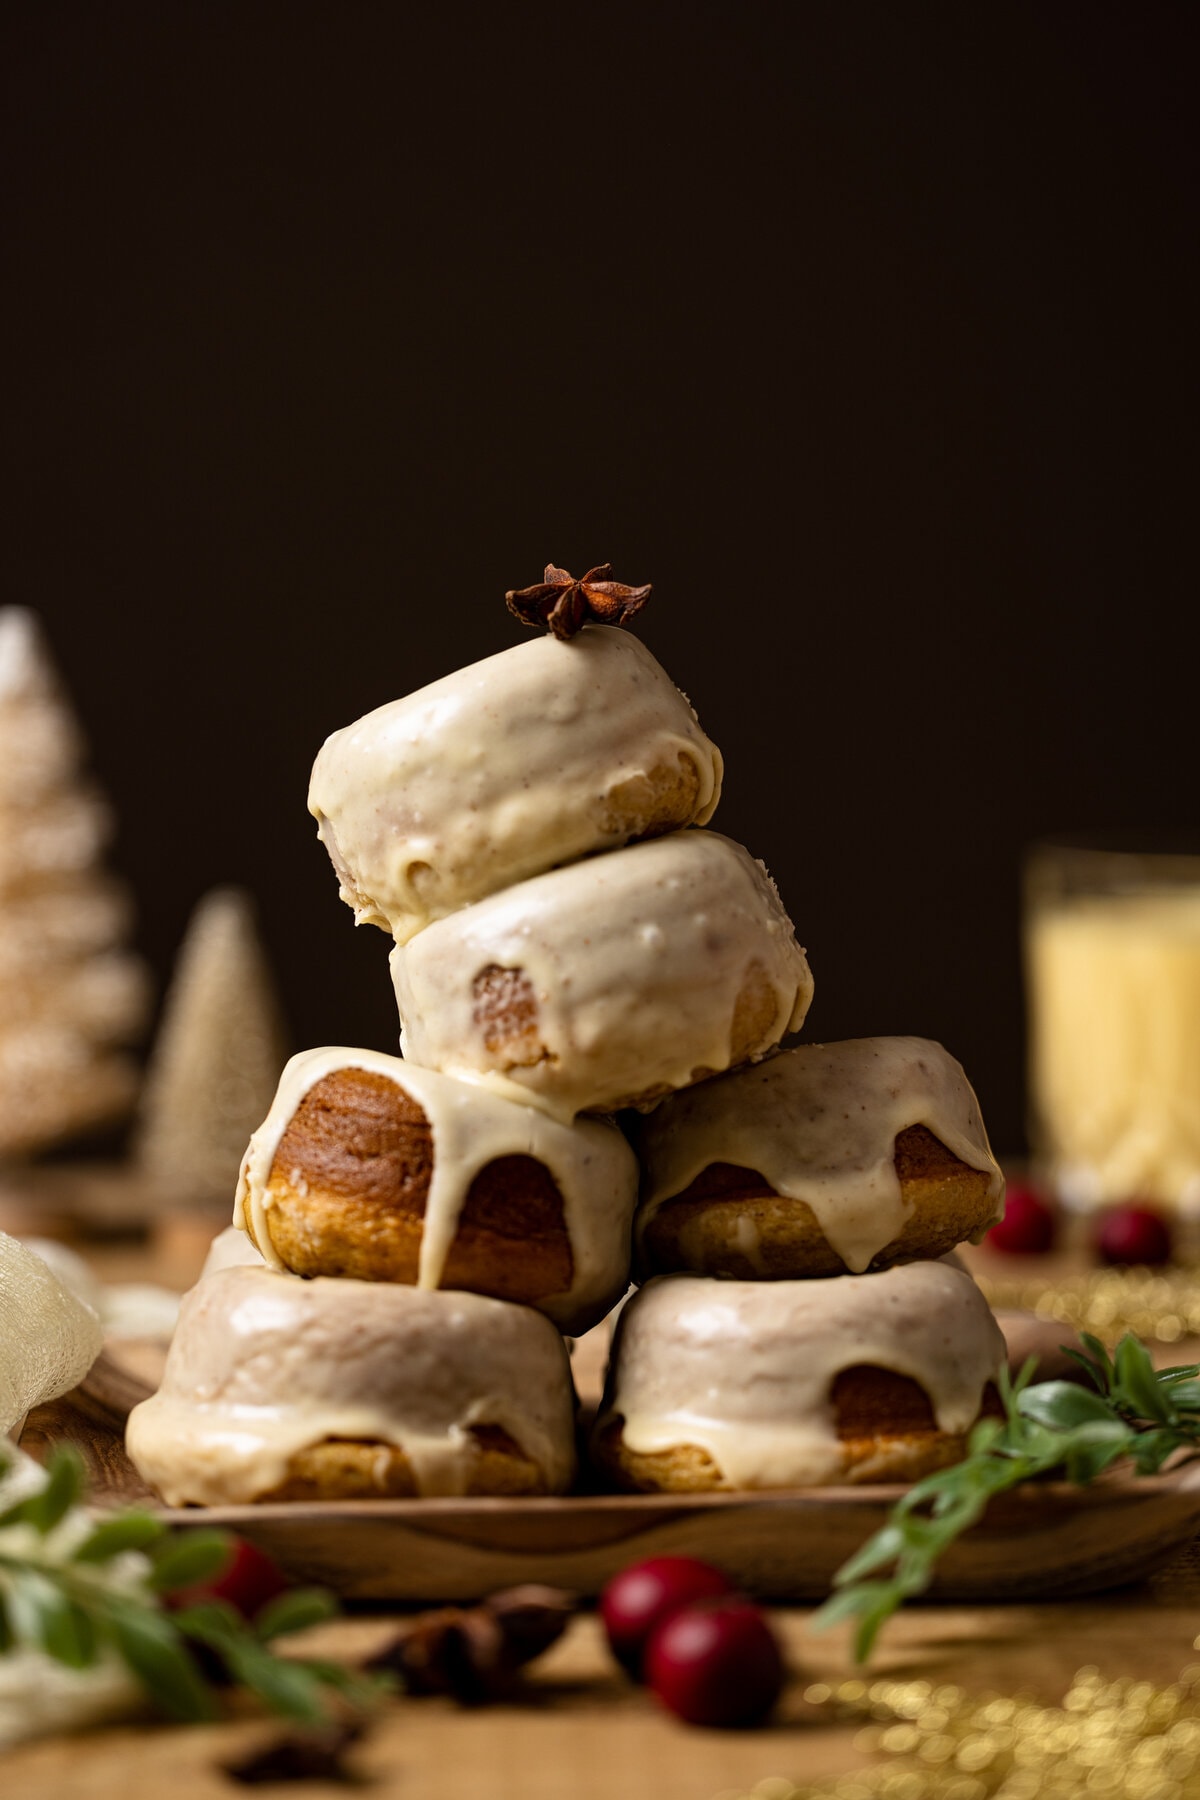 Donuts stacked a top each other with festive holiday decor.